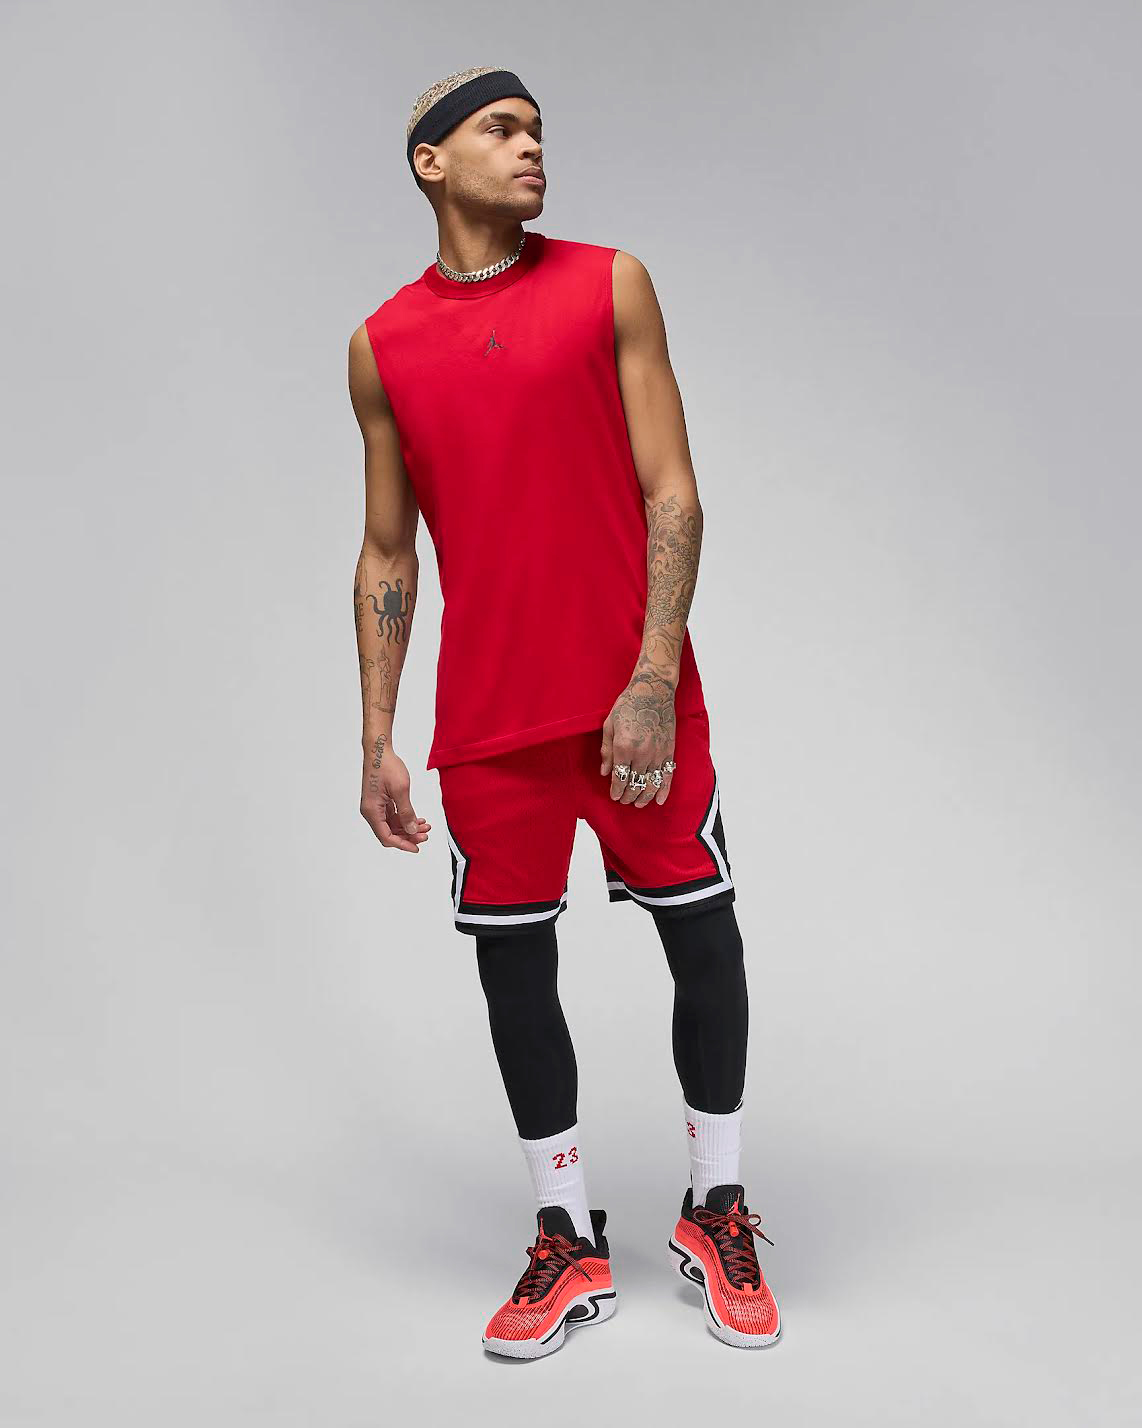 Jordan-Sport-Sleeveless-Top-Shorts-Gym-Red-Outfit